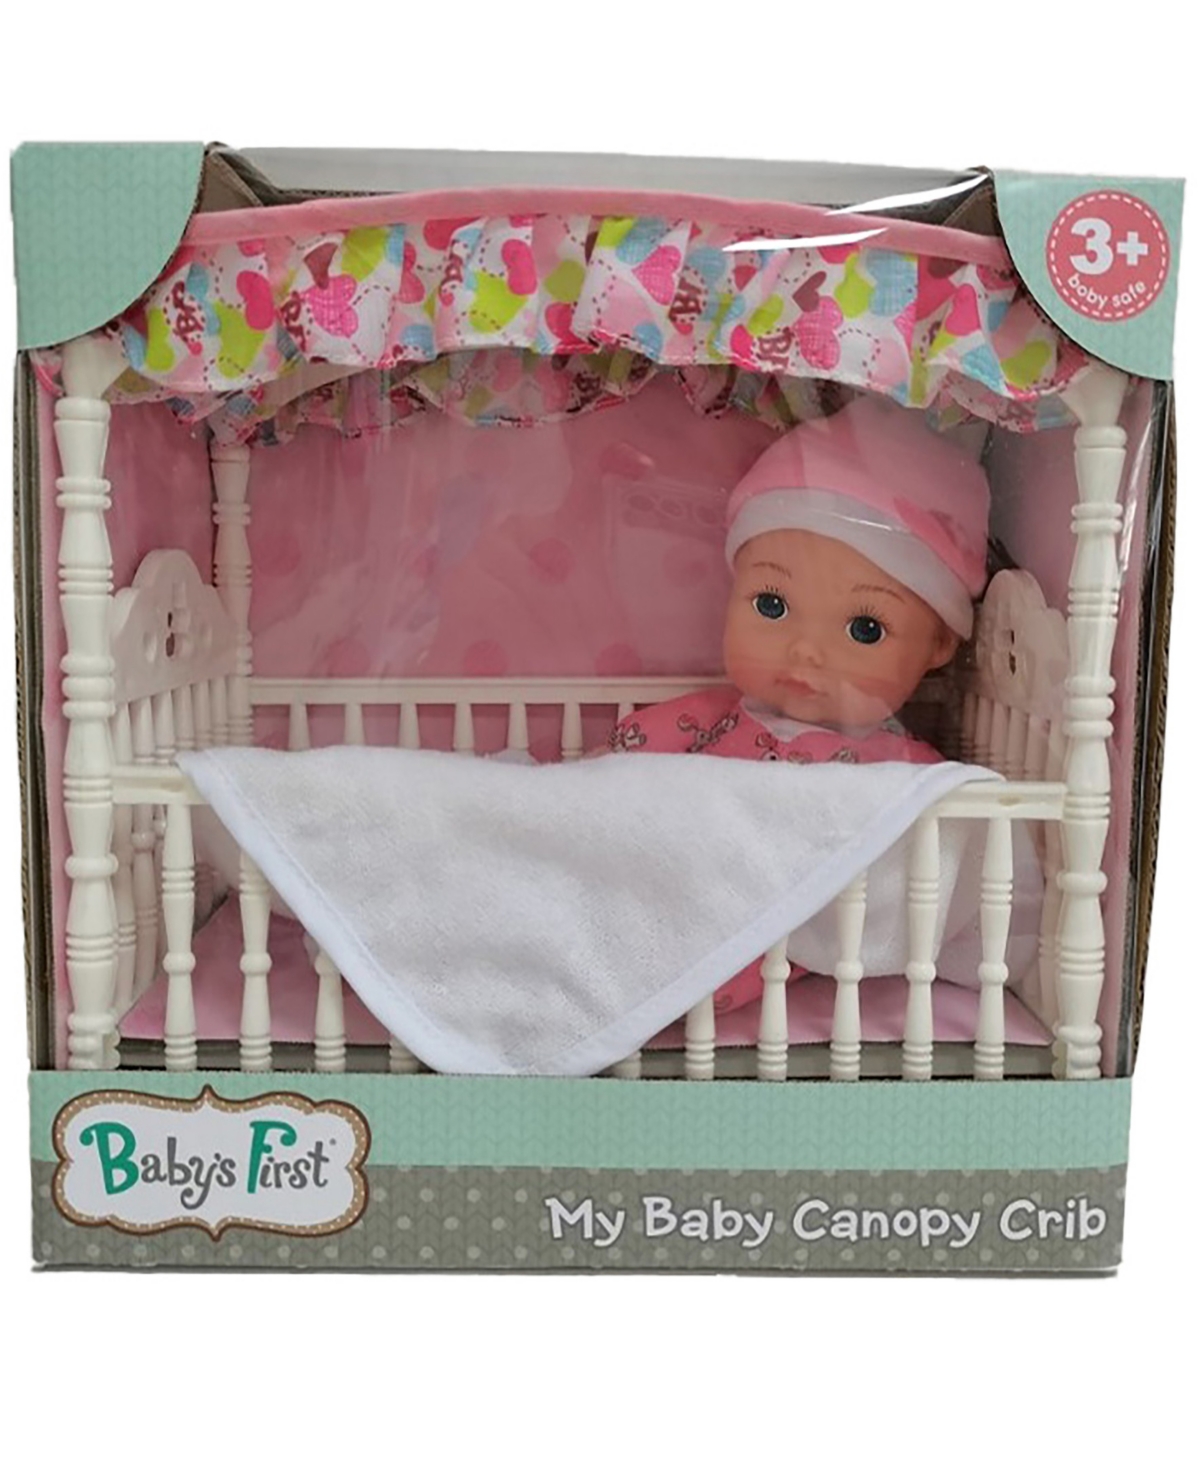 Baby's First By Nemcor Babies' Canopy Crib With Toy Doll In Multi